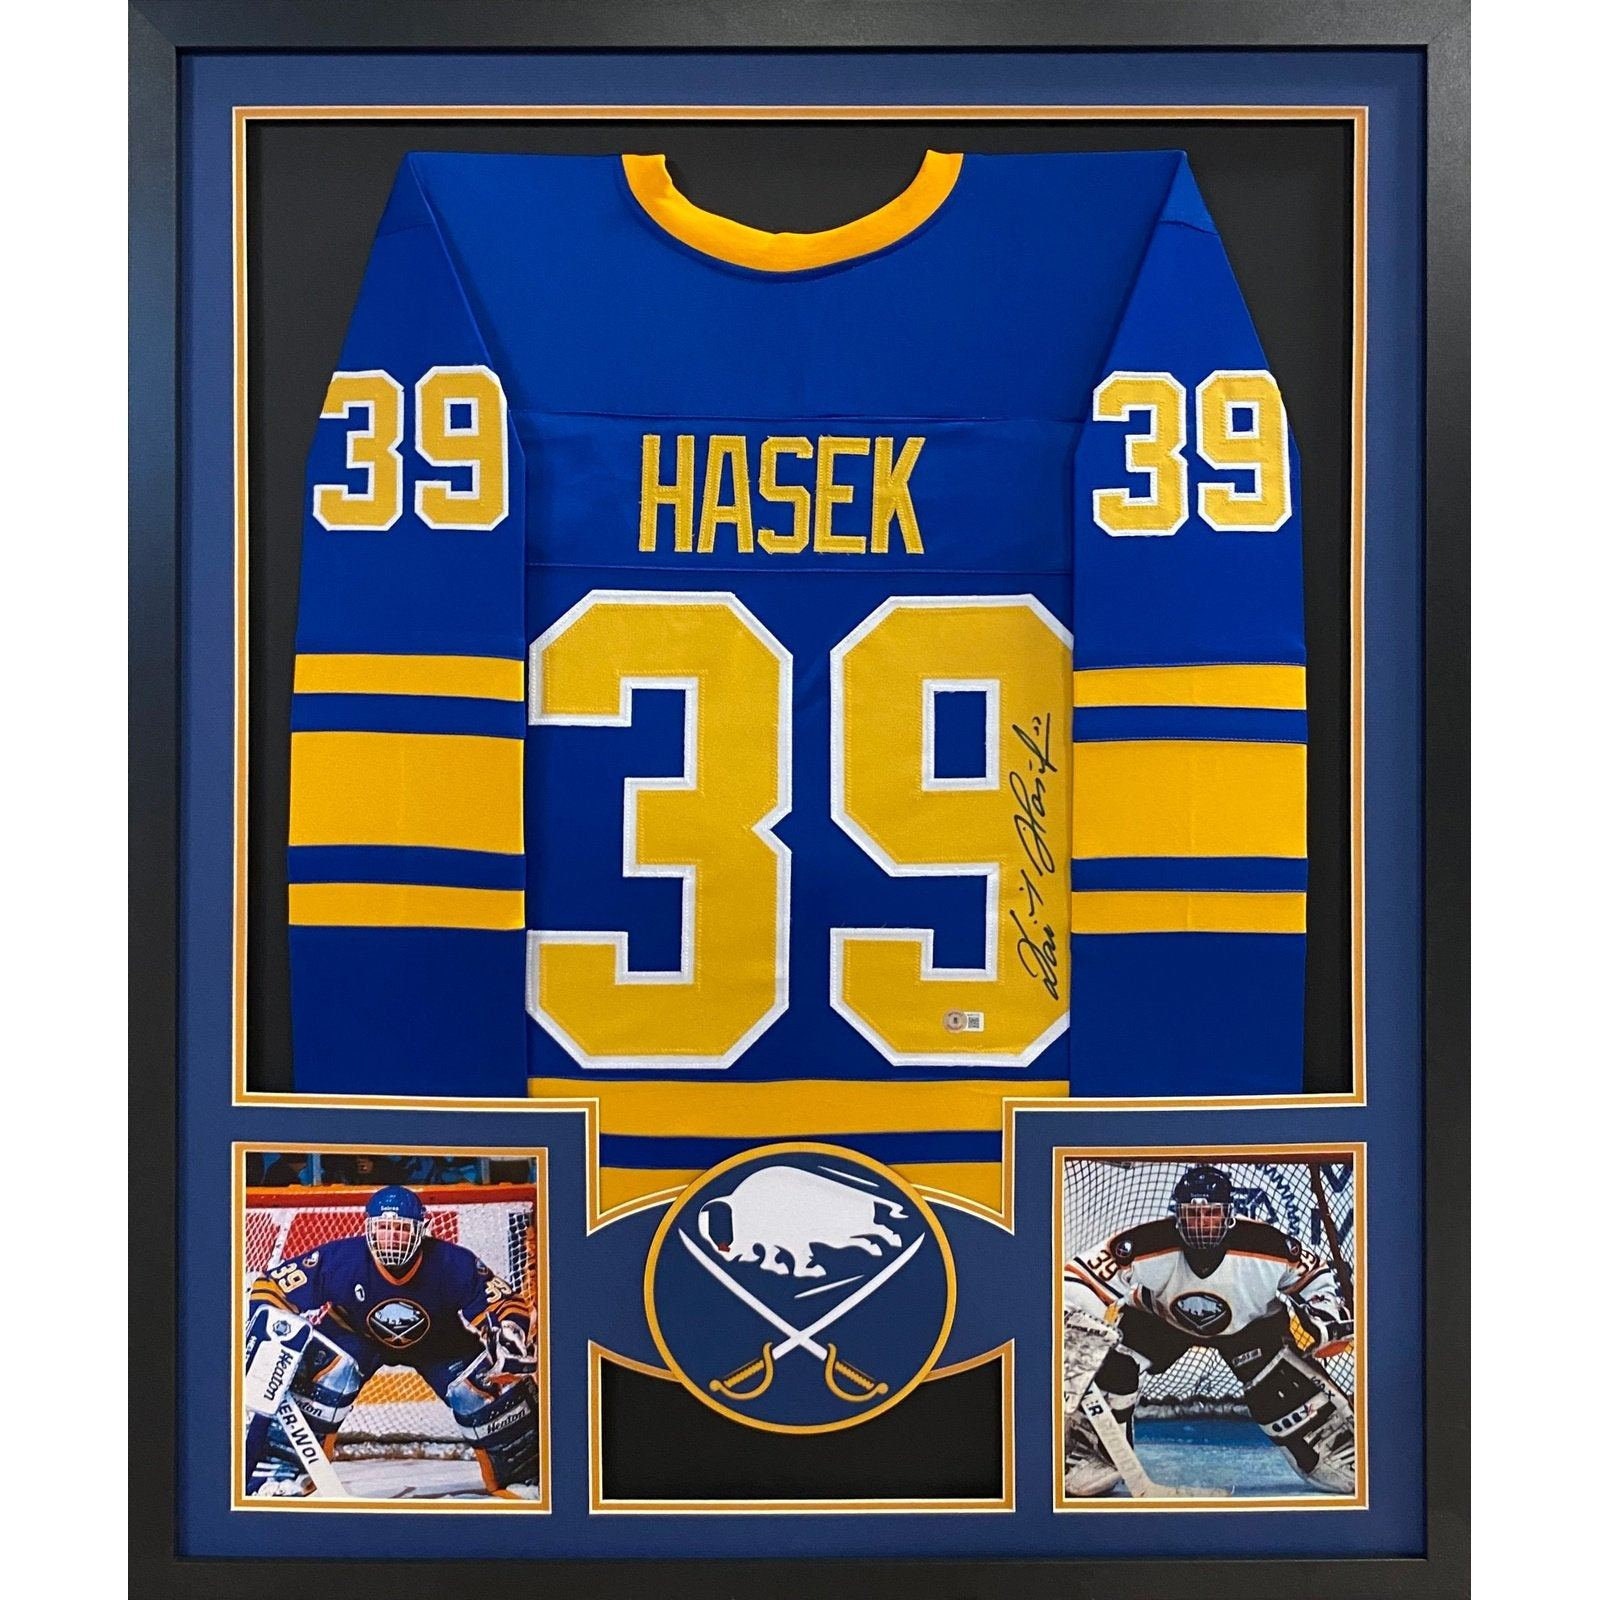 Search results for: 'hasek jersey